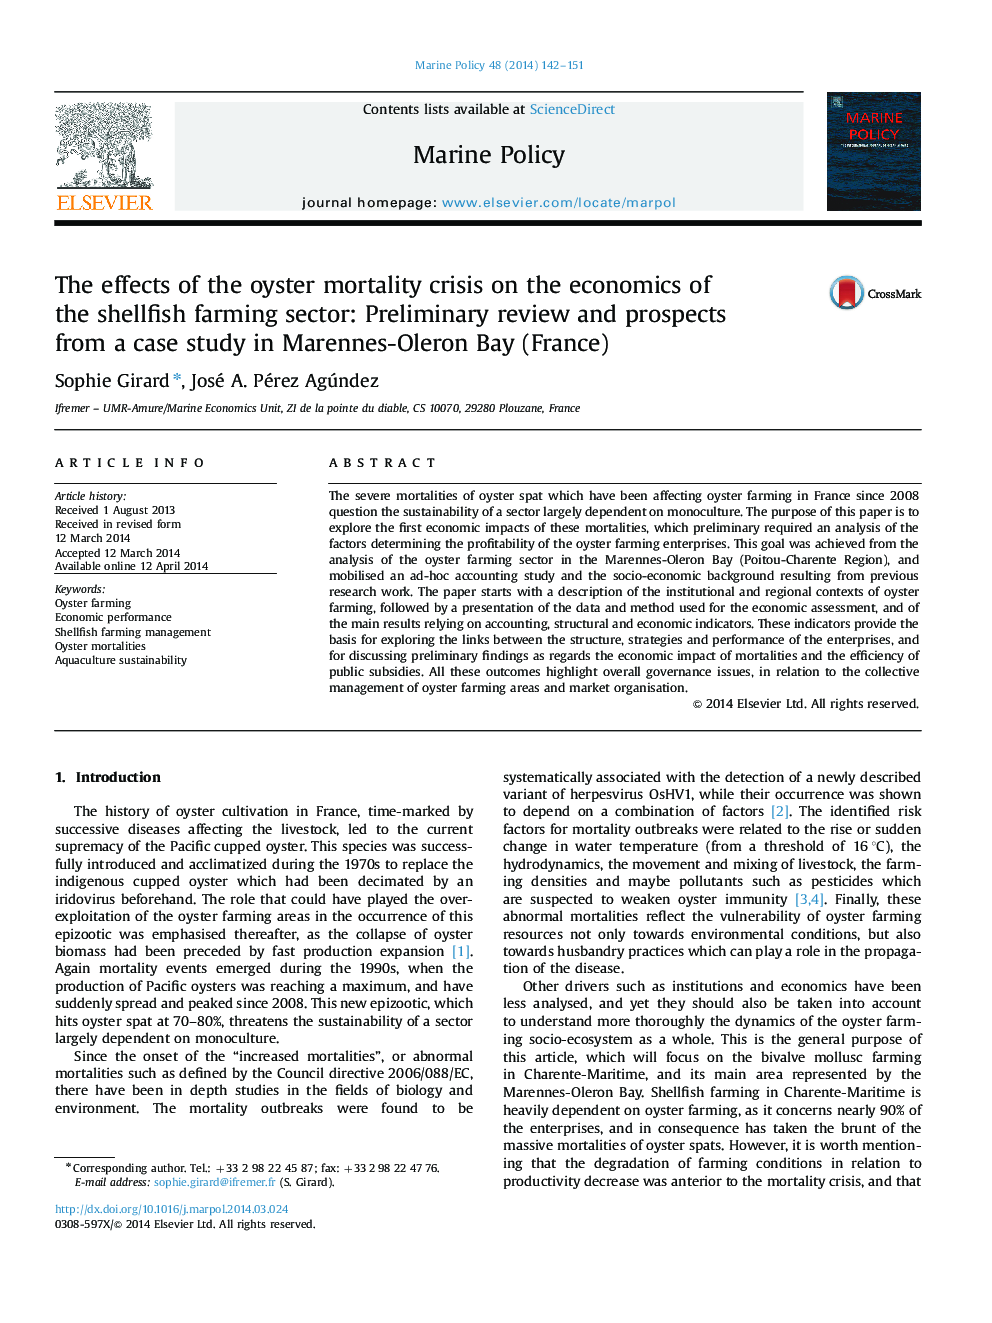 The effects of the oyster mortality crisis on the economics of the shellfish farming sector: Preliminary review and prospects from a case study in Marennes-Oleron Bay (France)